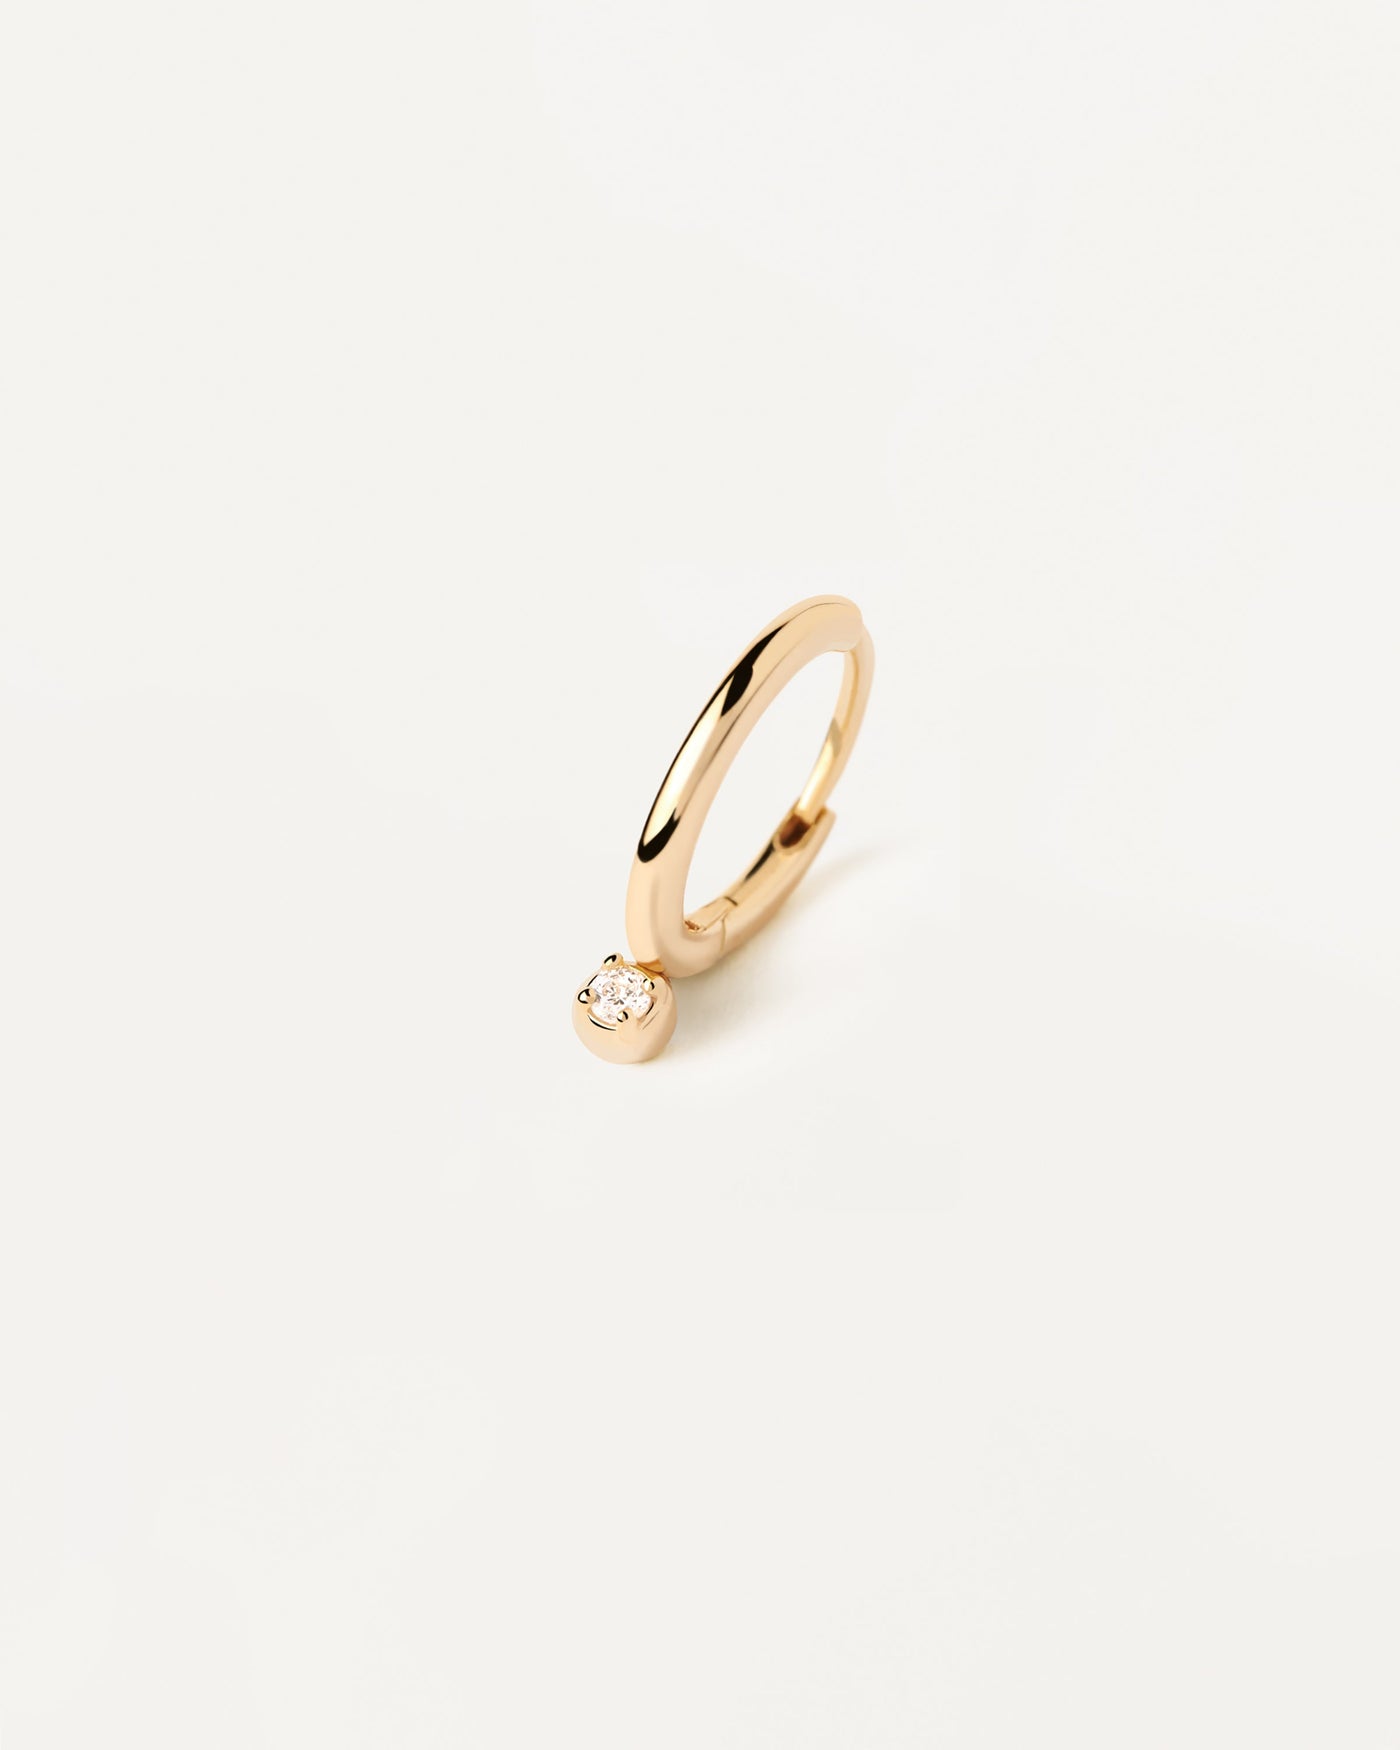 2023 Selection | Tide Single Hoop Earring. Gold-plated silver ear piercing with tiny white zirconia pendant. Get the latest arrival from PDPAOLA. Place your order safely and get this Best Seller. Free Shipping.